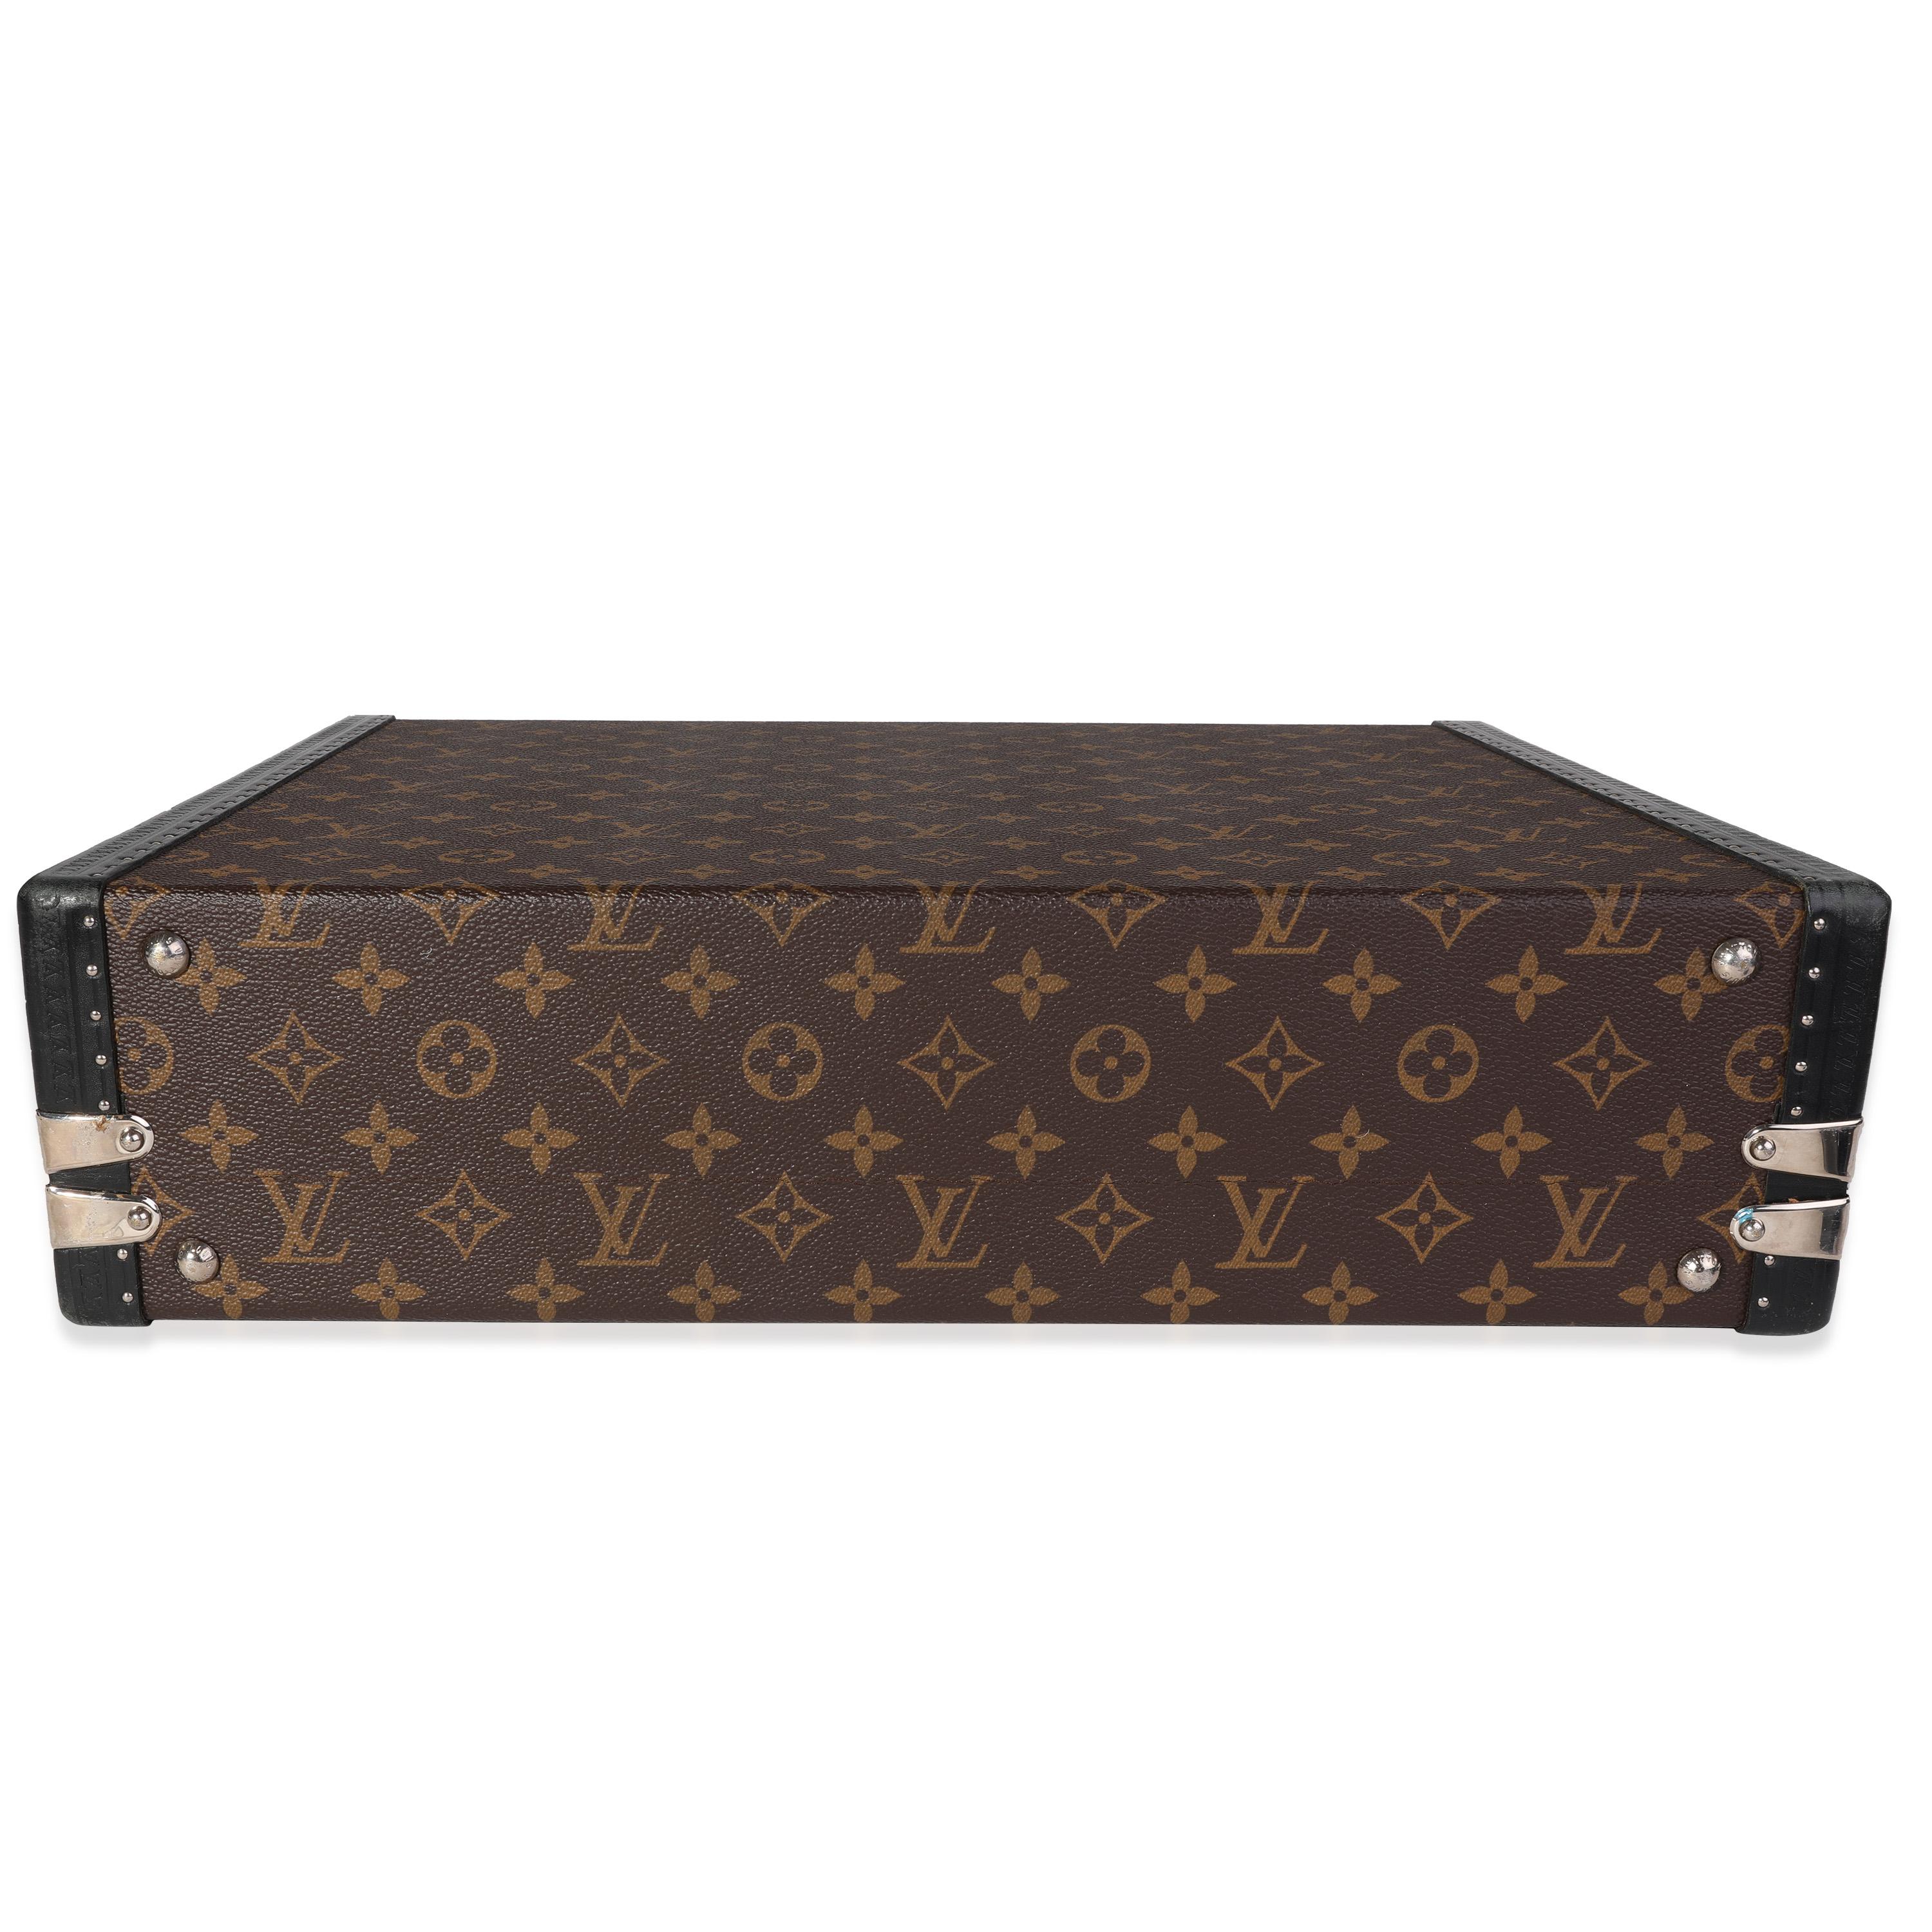 Louis Vuitton Monogram Macassar President Briefcase In Good Condition For Sale In New York, NY